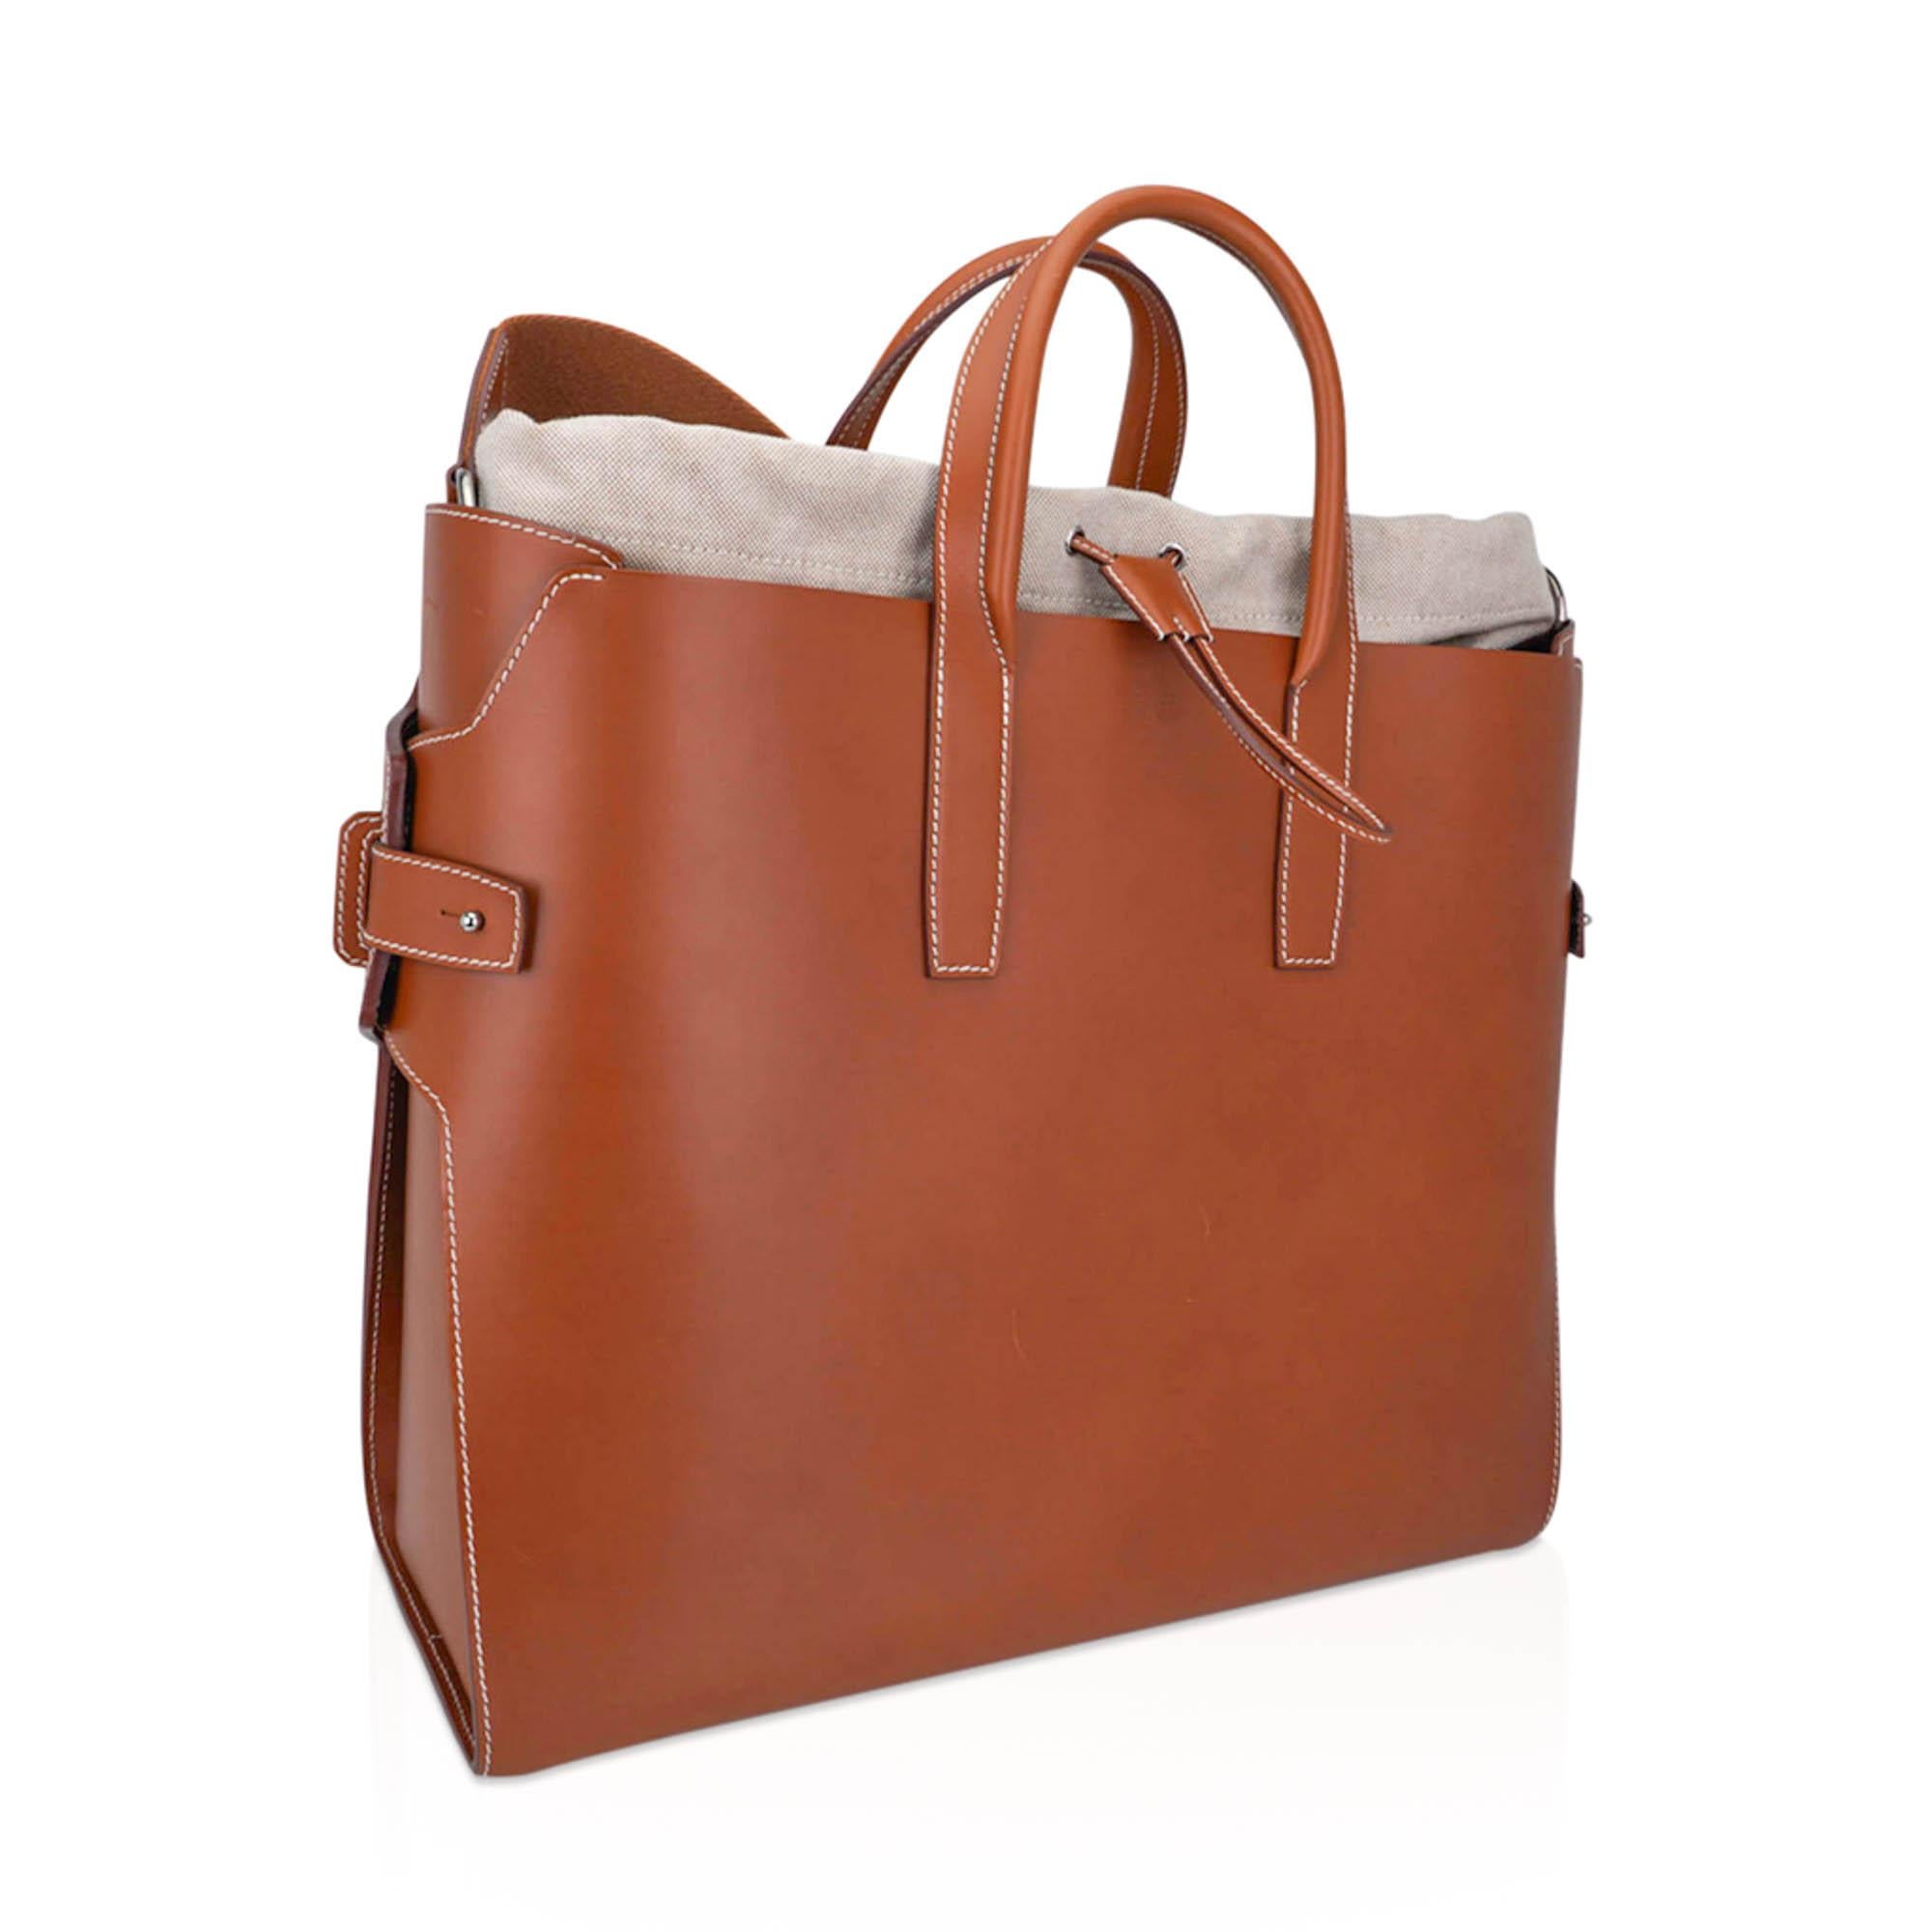 Mightychic offers a rare limited edition Hermes Tote featured in Fauve.
Tote has a detachable Toile insert with canvas shoulder strap.
The bag has Fauve leather handles and Palladium hardware.
Finished with white top stitch all around.
Toile insert